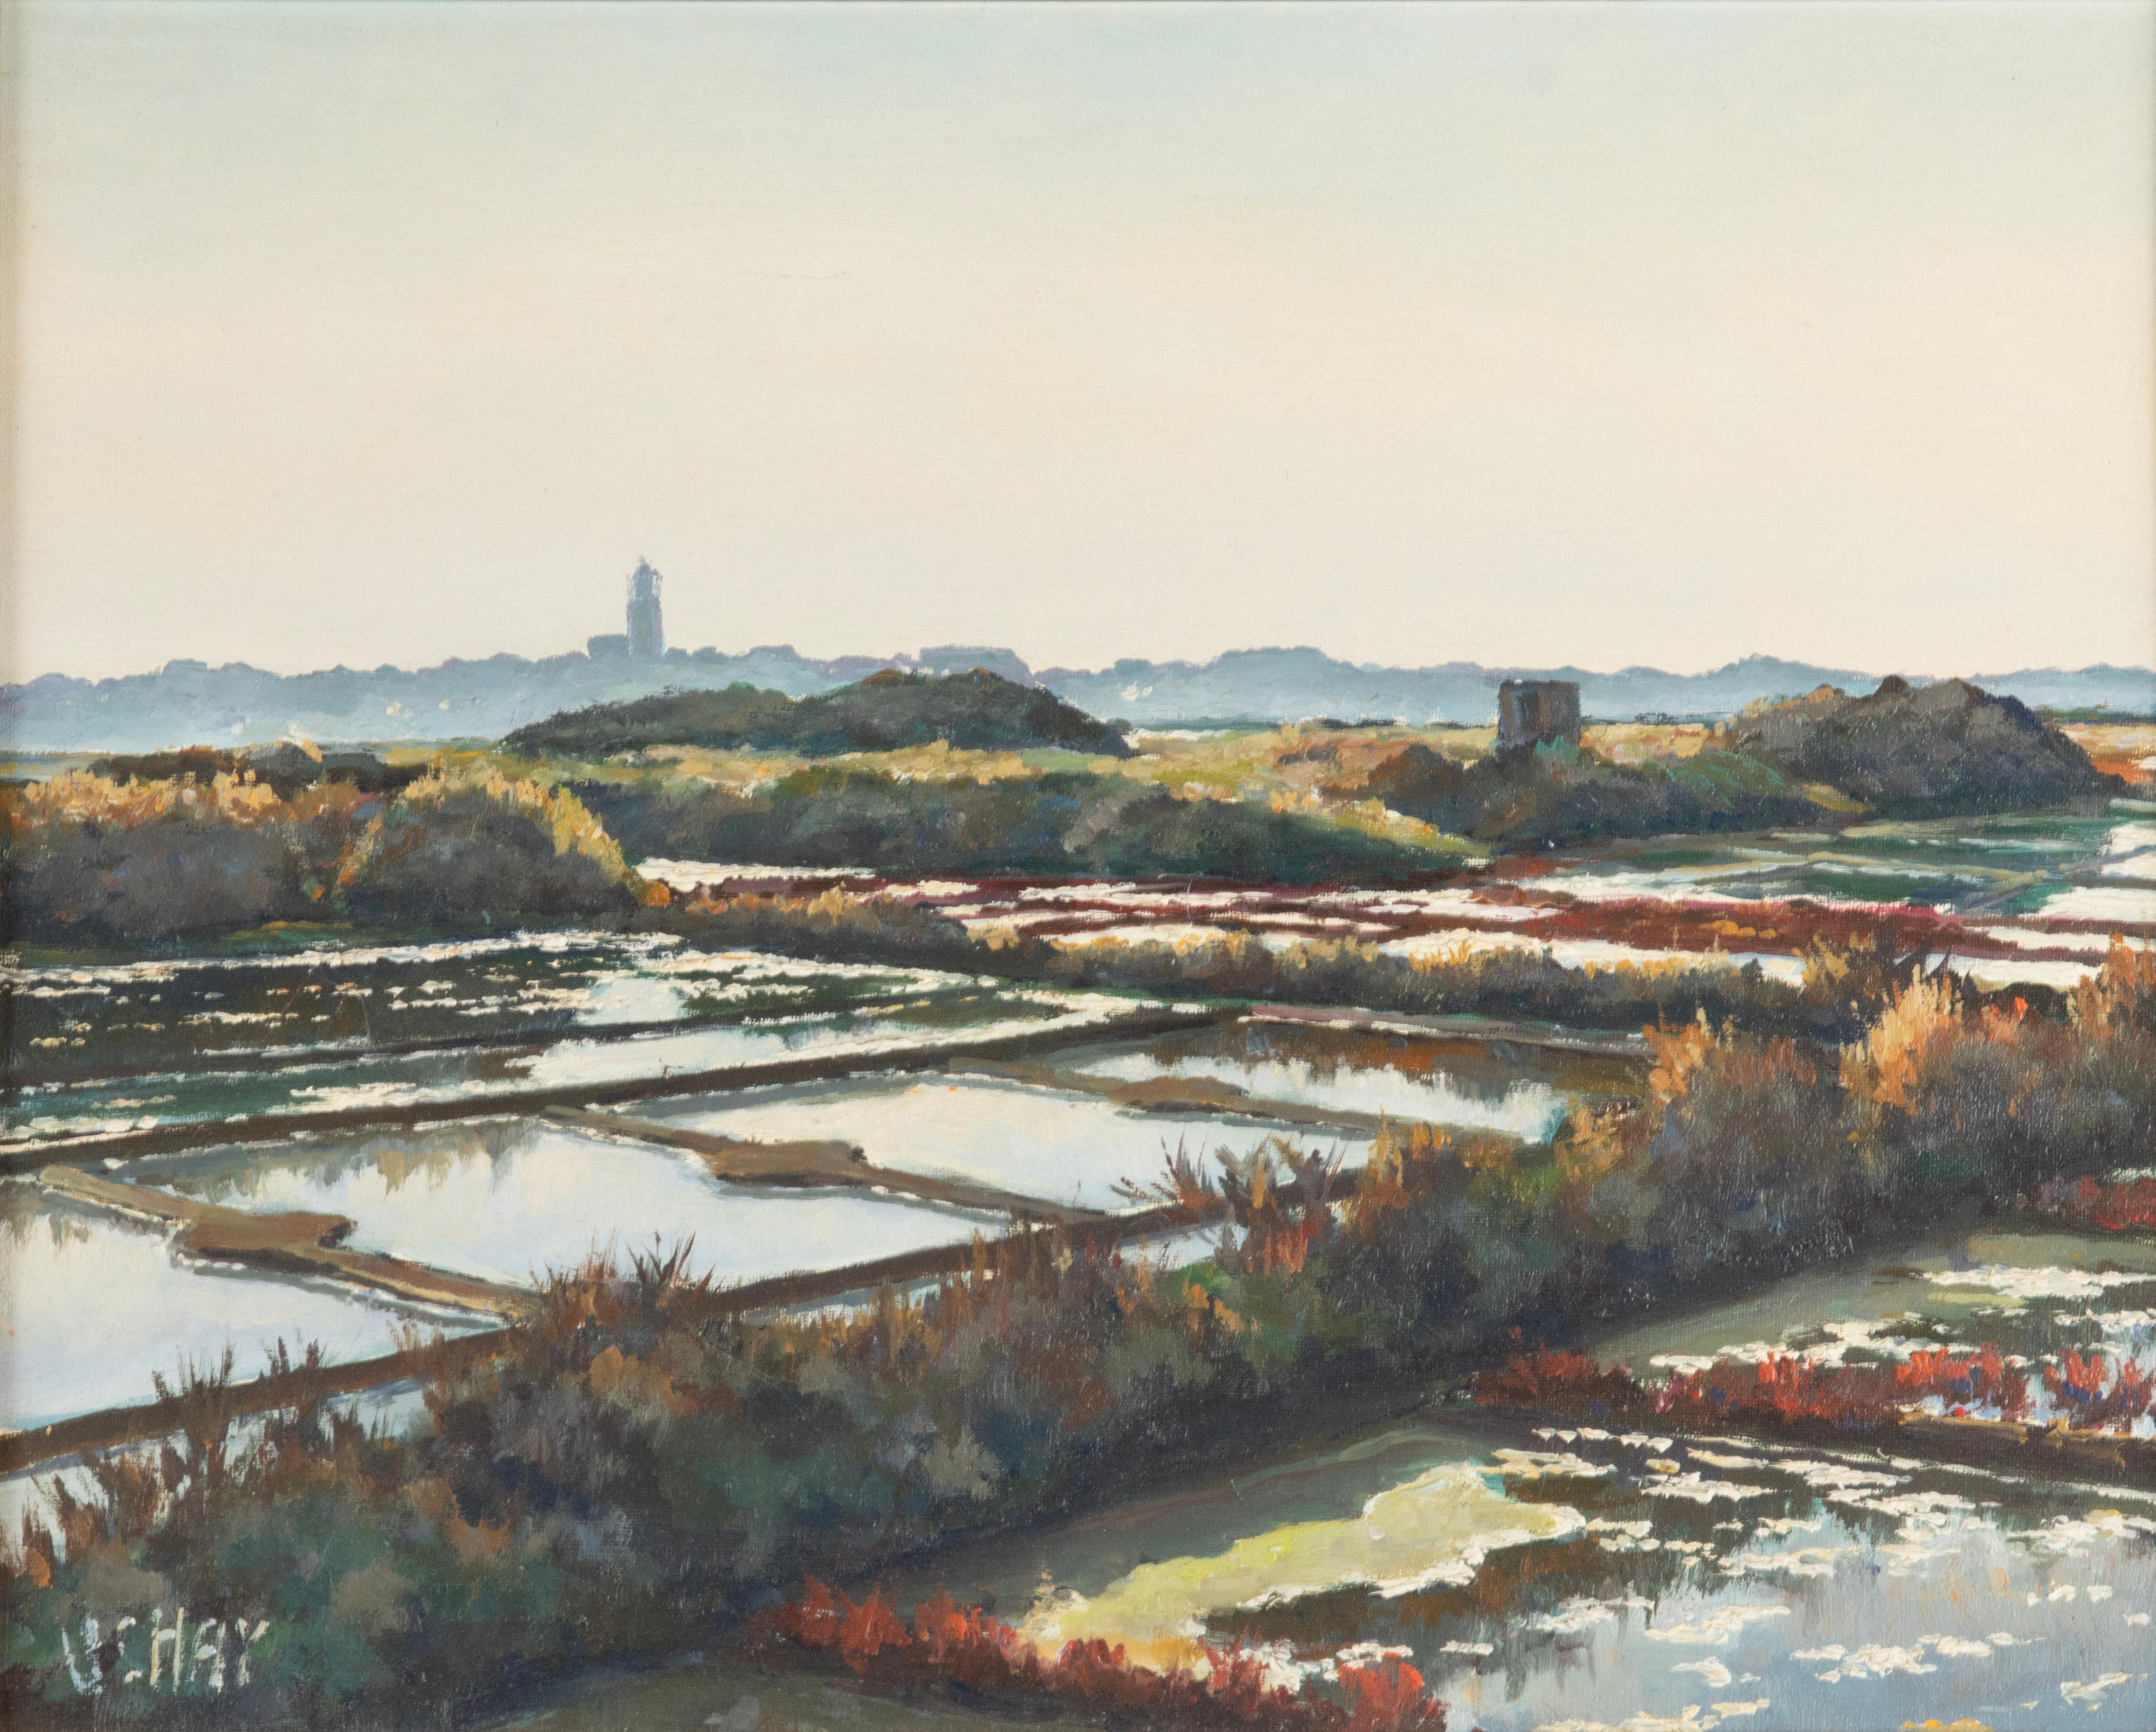 Oil painting of sea salt salt production reservoirs at he Breton coast of France. Signed left under: René UCHAY. The sea salt is extracted in a traditional way at Guérande and on the island of Noirmoutier and is widely used in French